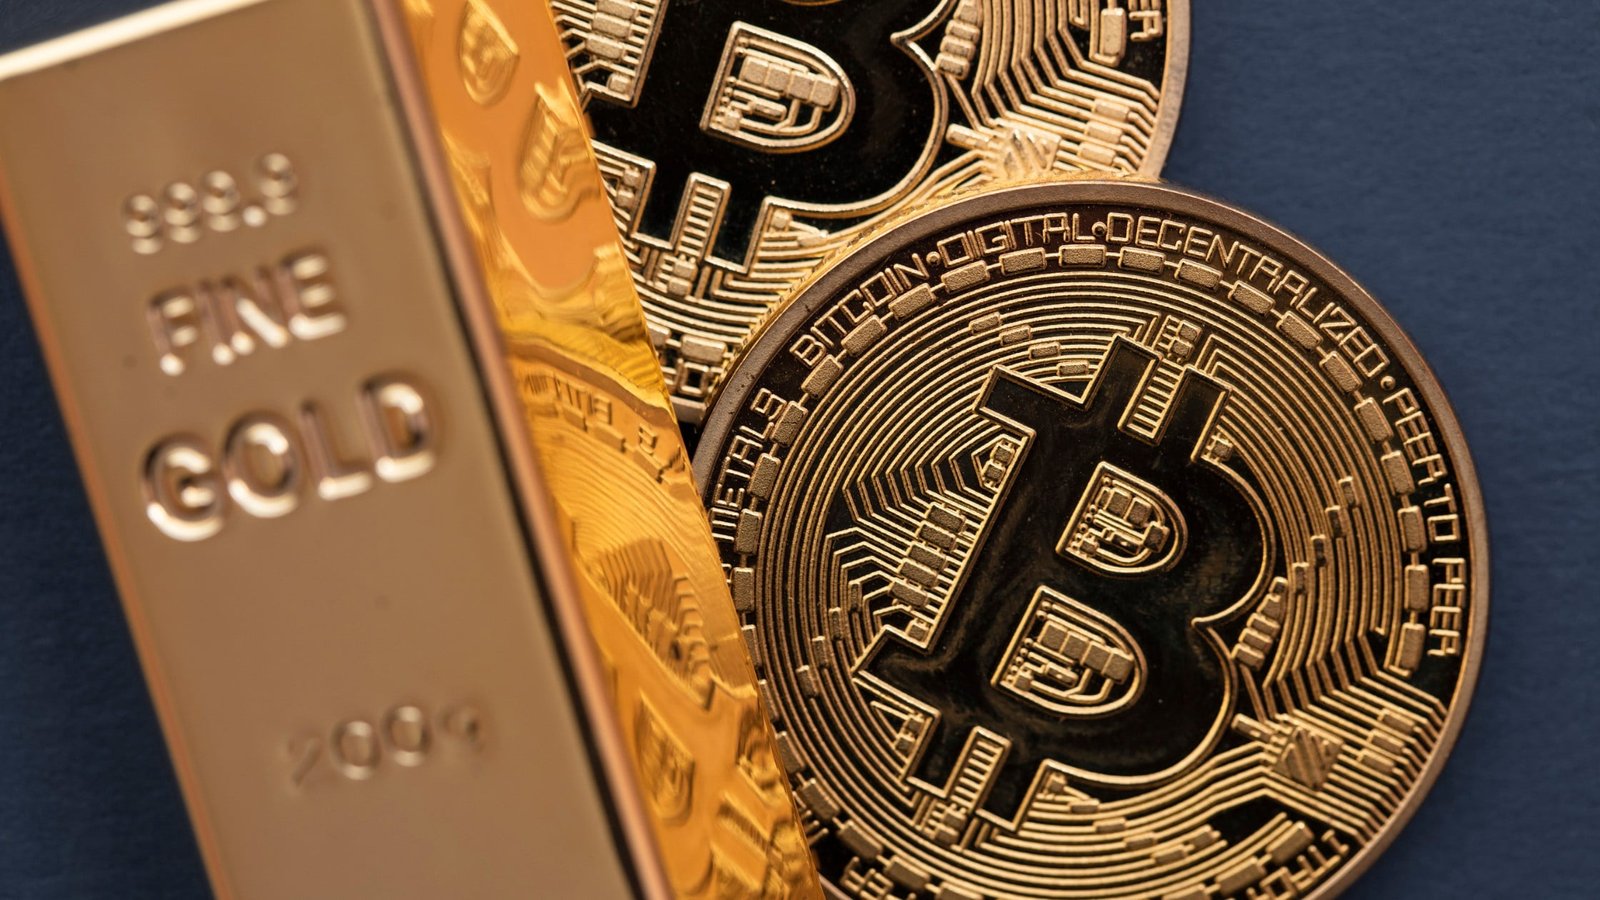 Read more about the article Cryptocurrency Investing: Is It Too Late to Get In?